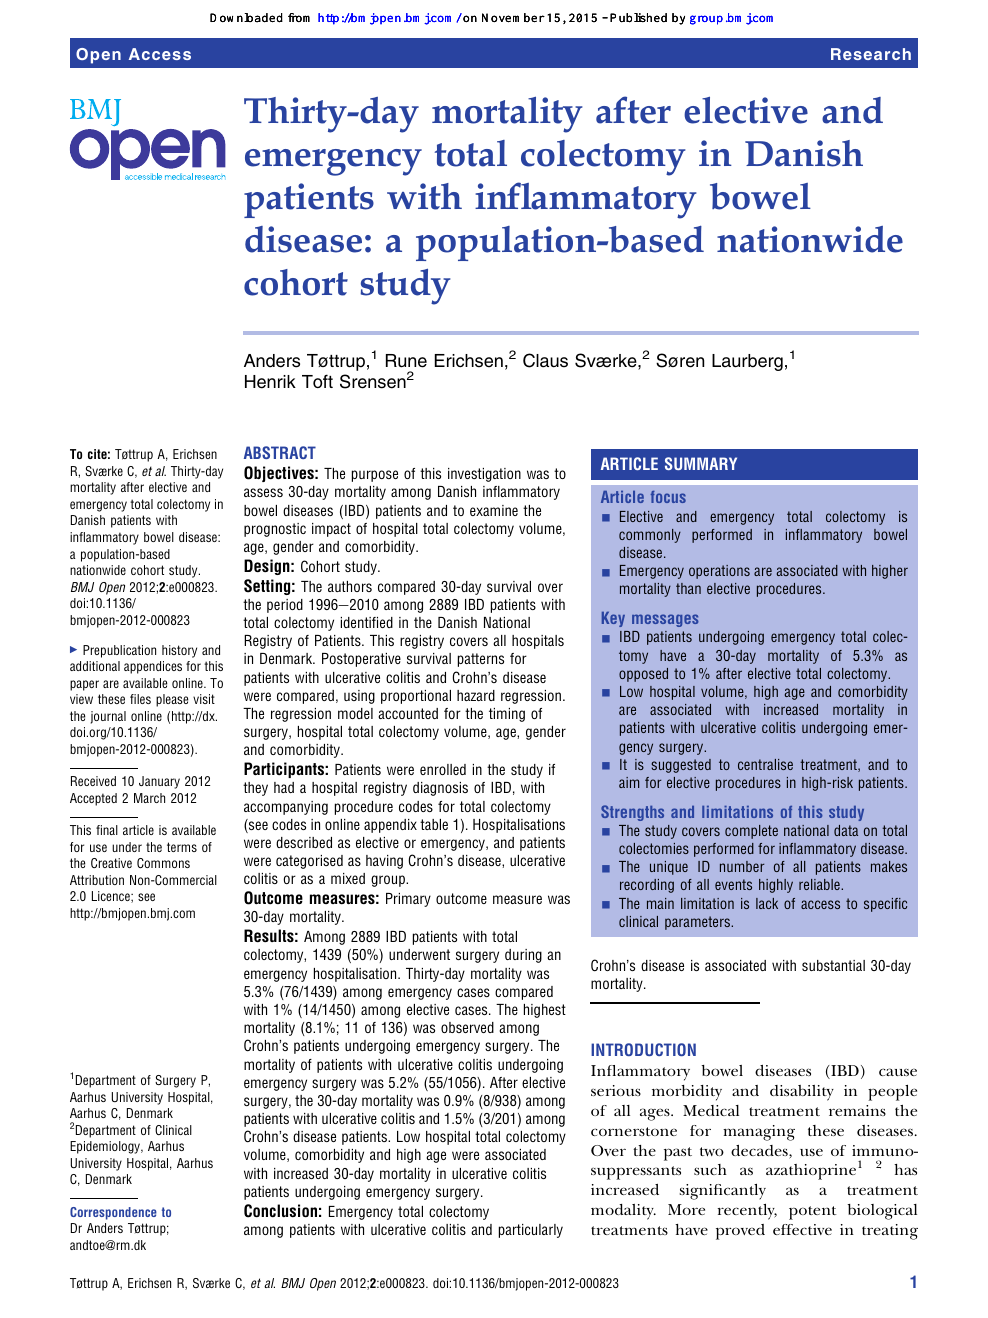 Thirty Day Mortality After Elective And Emergency Total Colectomy In Danish Patients With Inflammatory Bowel Disease A Population Based Nationwide Cohort Study Topic Of Research Paper In Health Sciences Download Scholarly Article Pdf